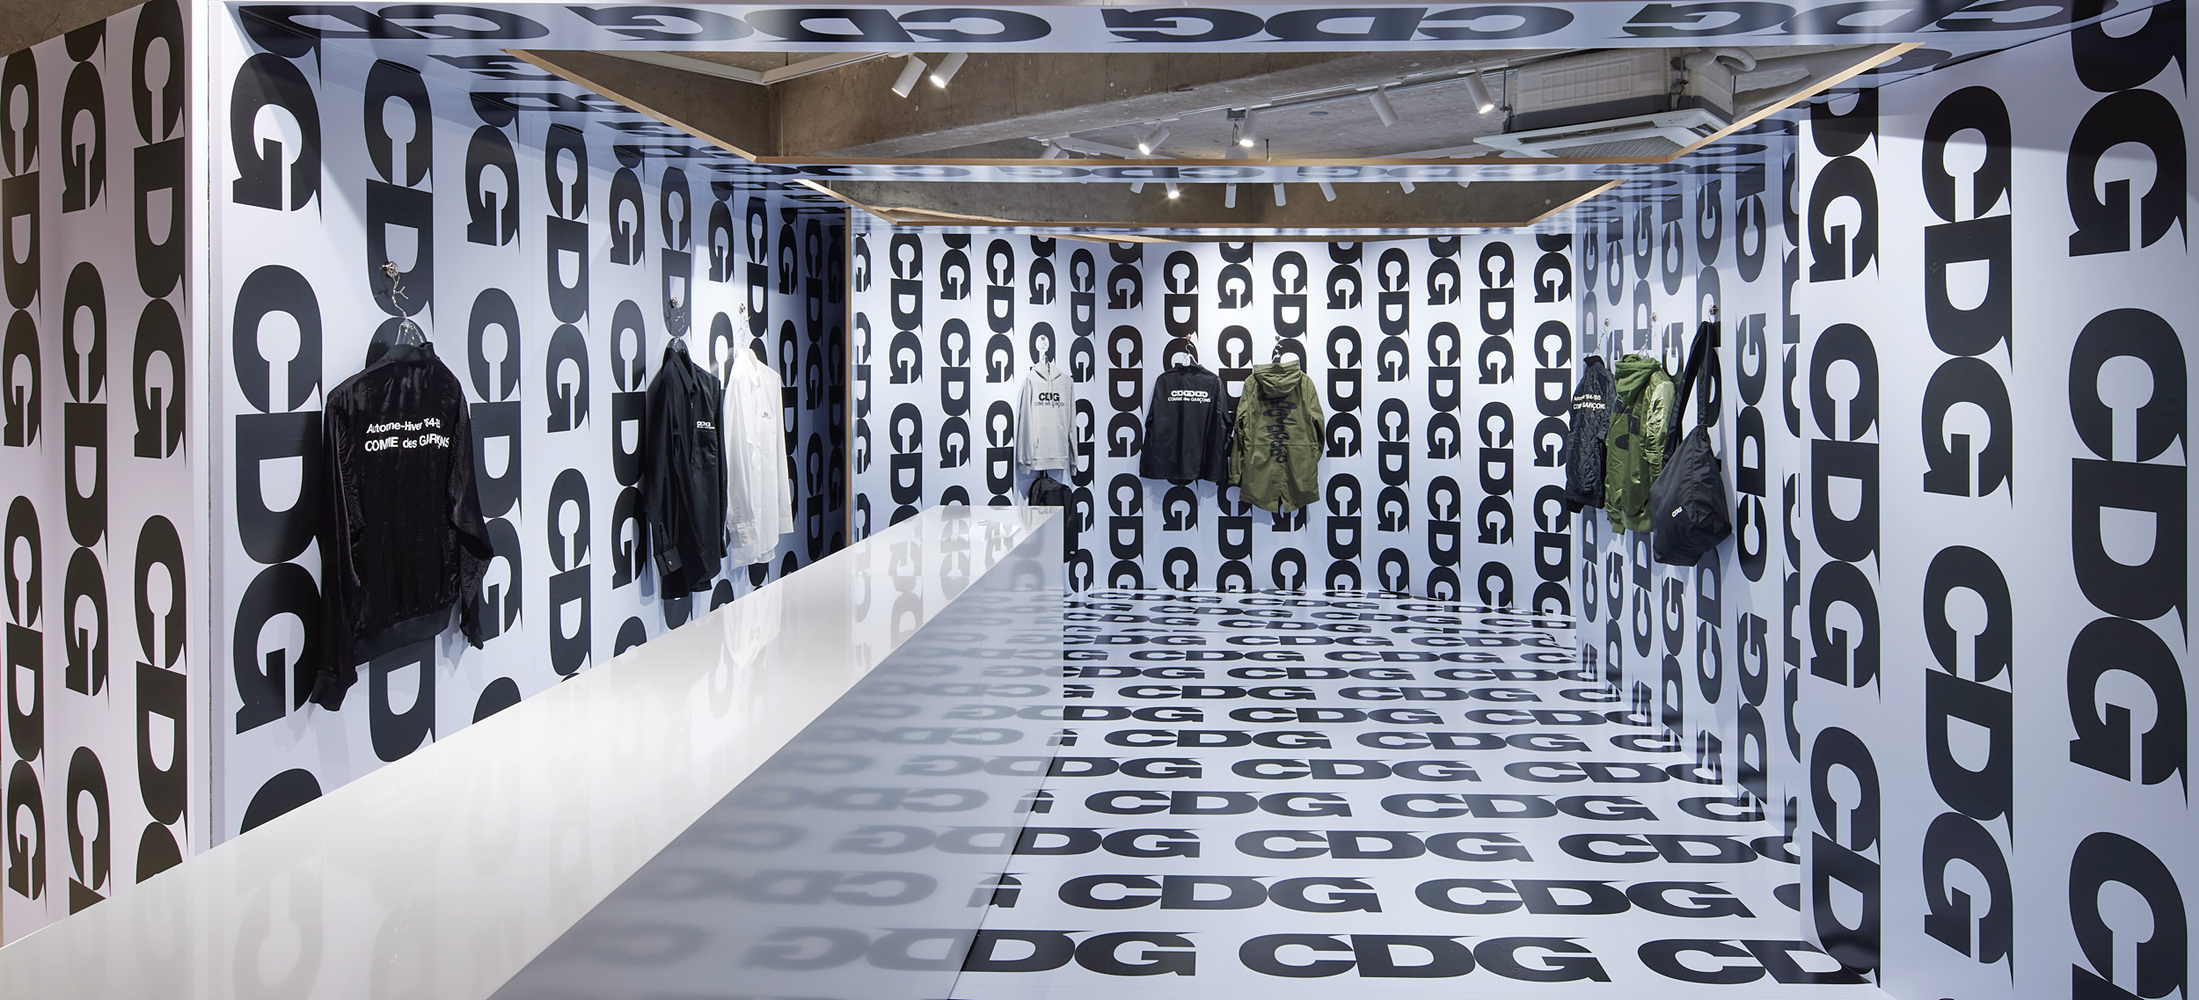 Visitors to the CDGCDGCDG pop-up store can experience its unique brand identity.